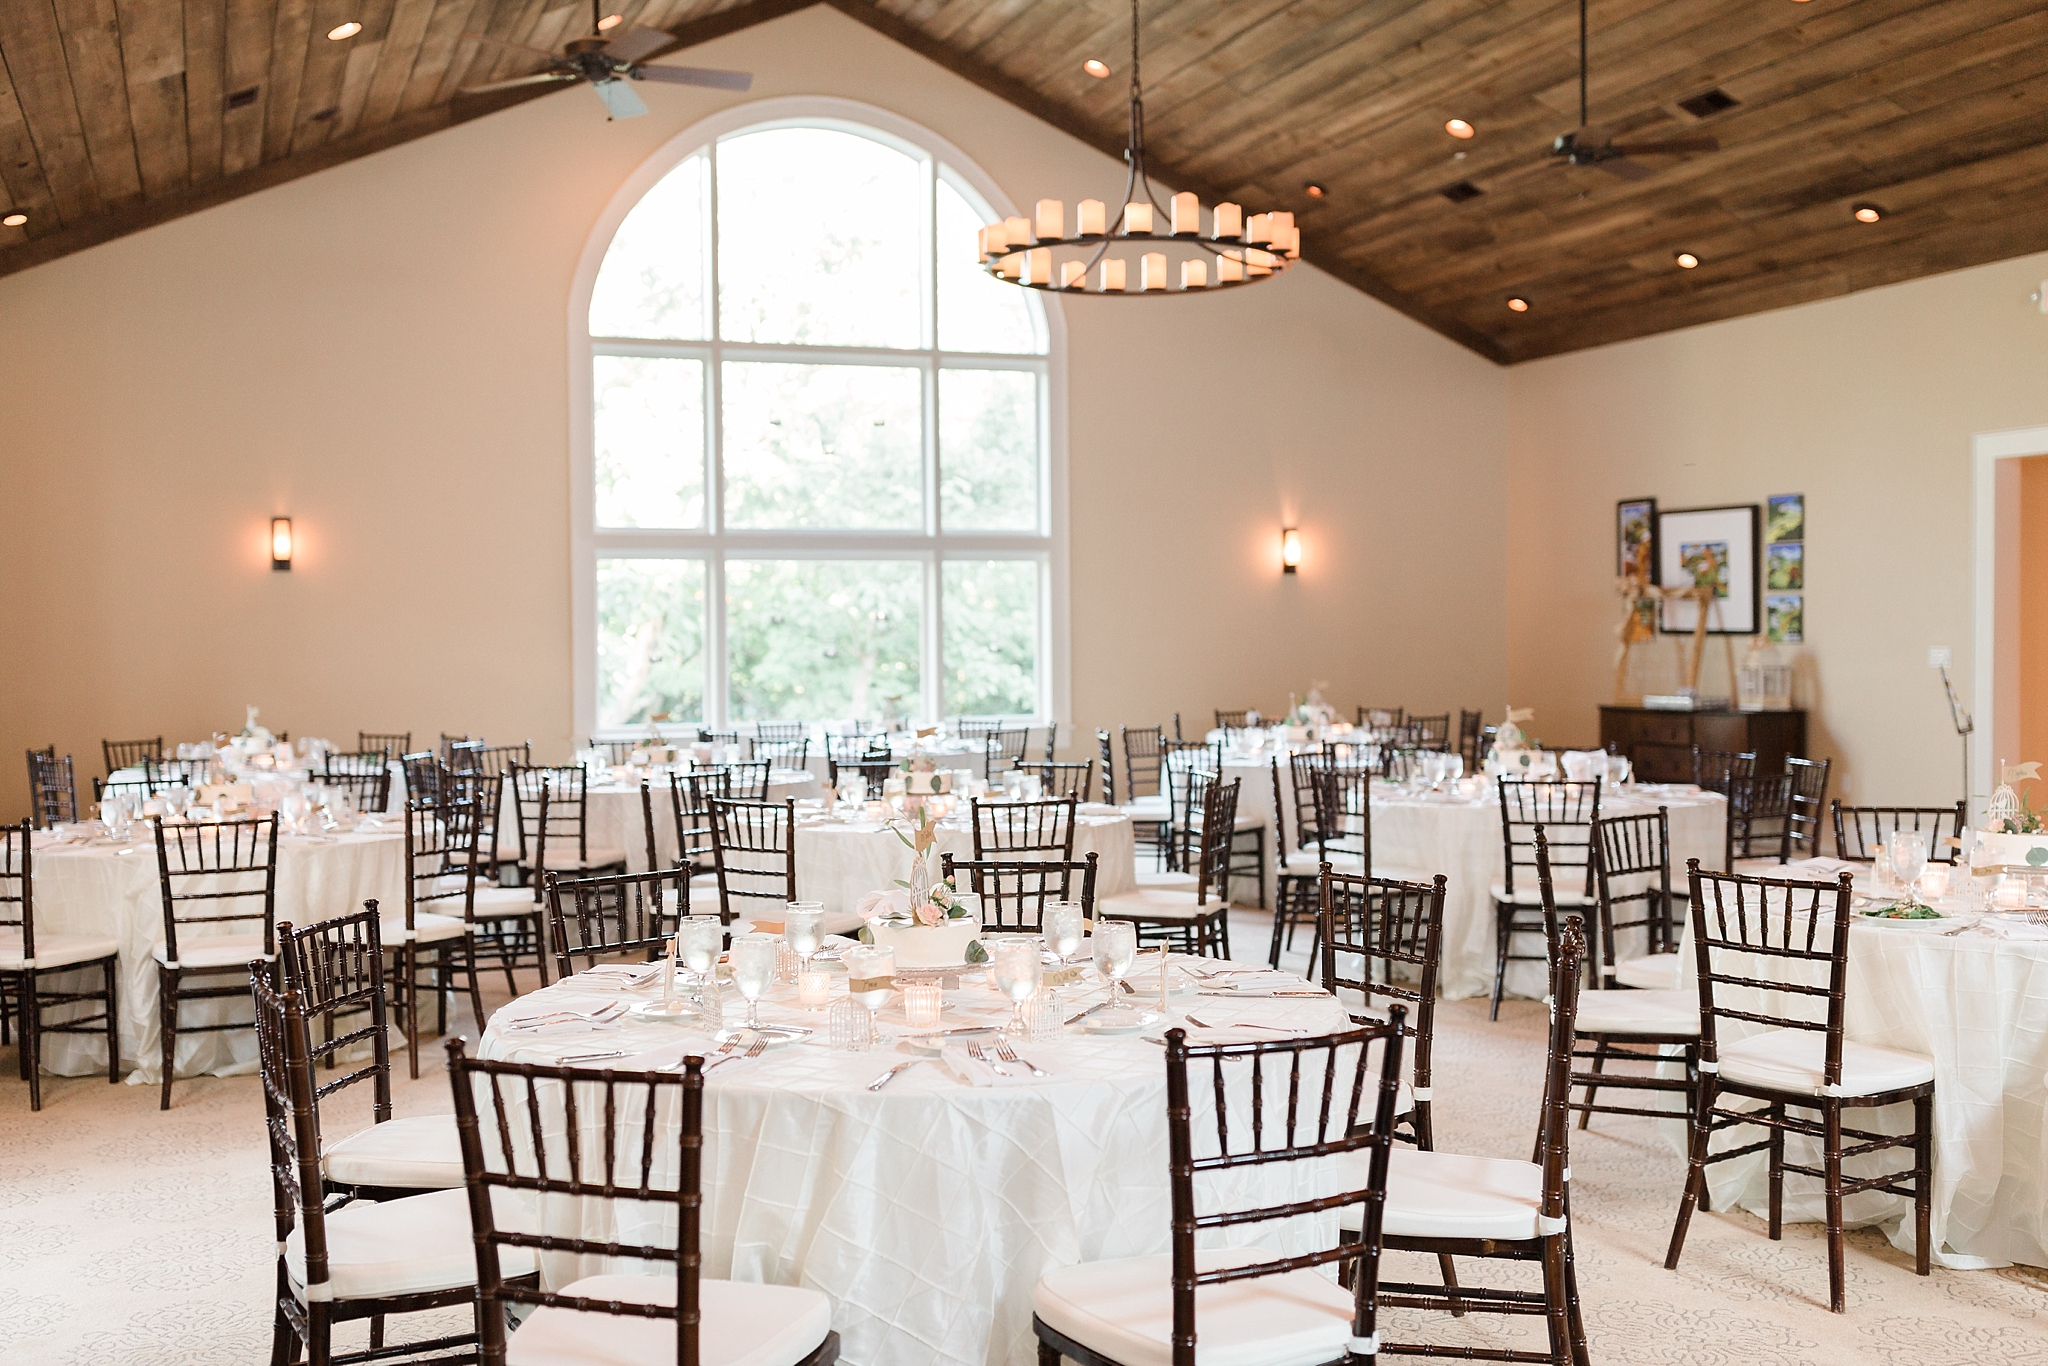 This Inn at Willow Grove Wedding in Orange, VA features a travel themed affair as a nod to the bride and groom's guests from across the world!